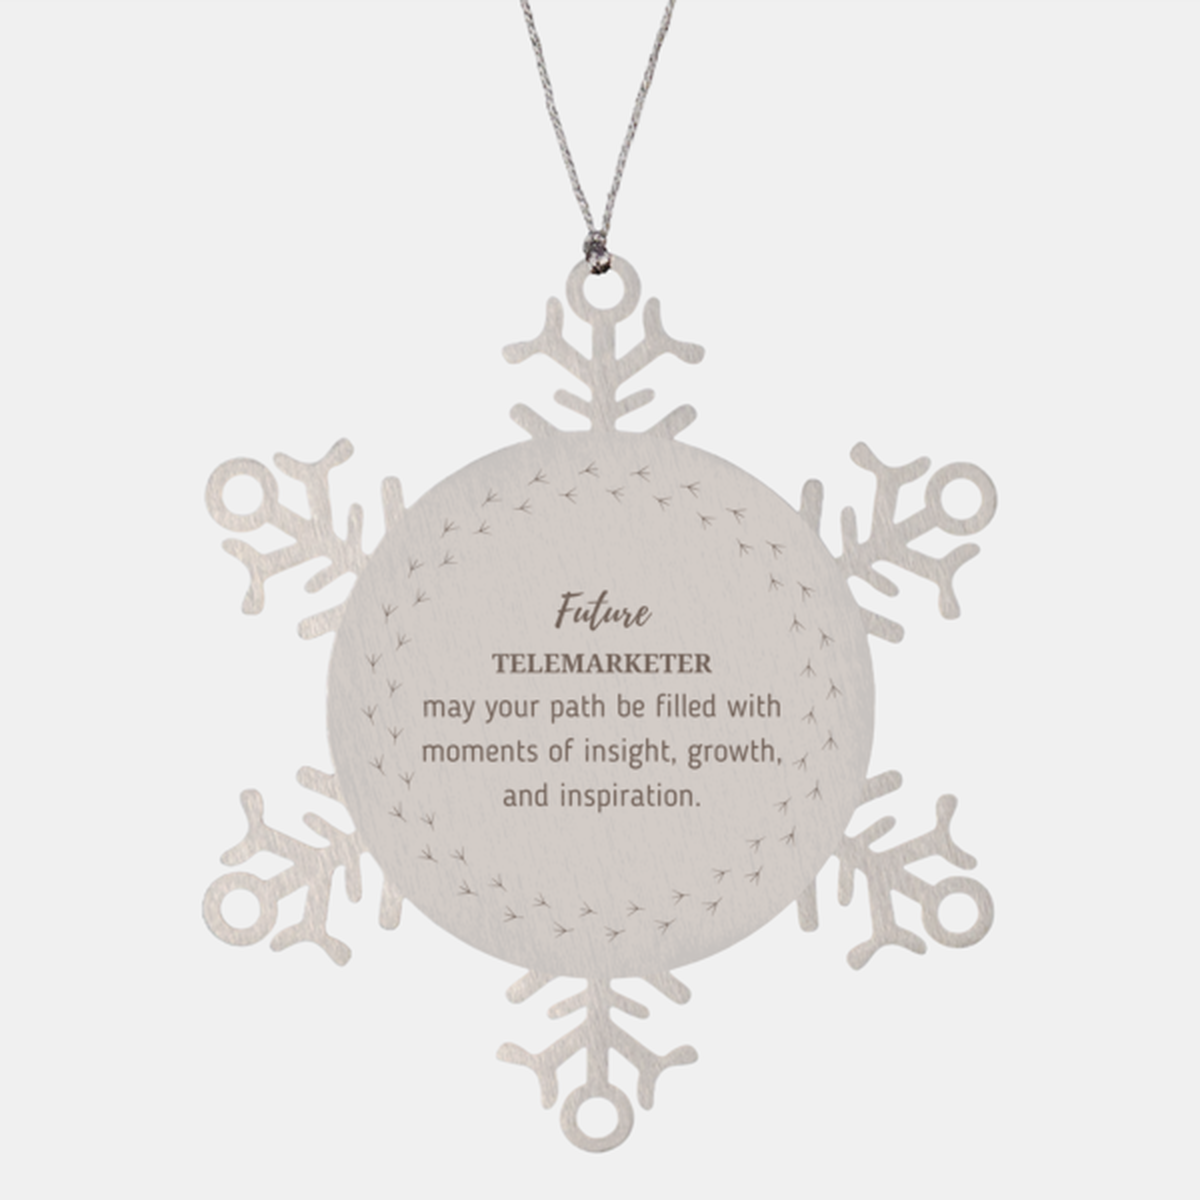 Future Telemarketer Gifts, May your path be filled with moments of insight, Graduation Gifts for New Telemarketer, Christmas Unique Snowflake Ornament For Men, Women, Friends